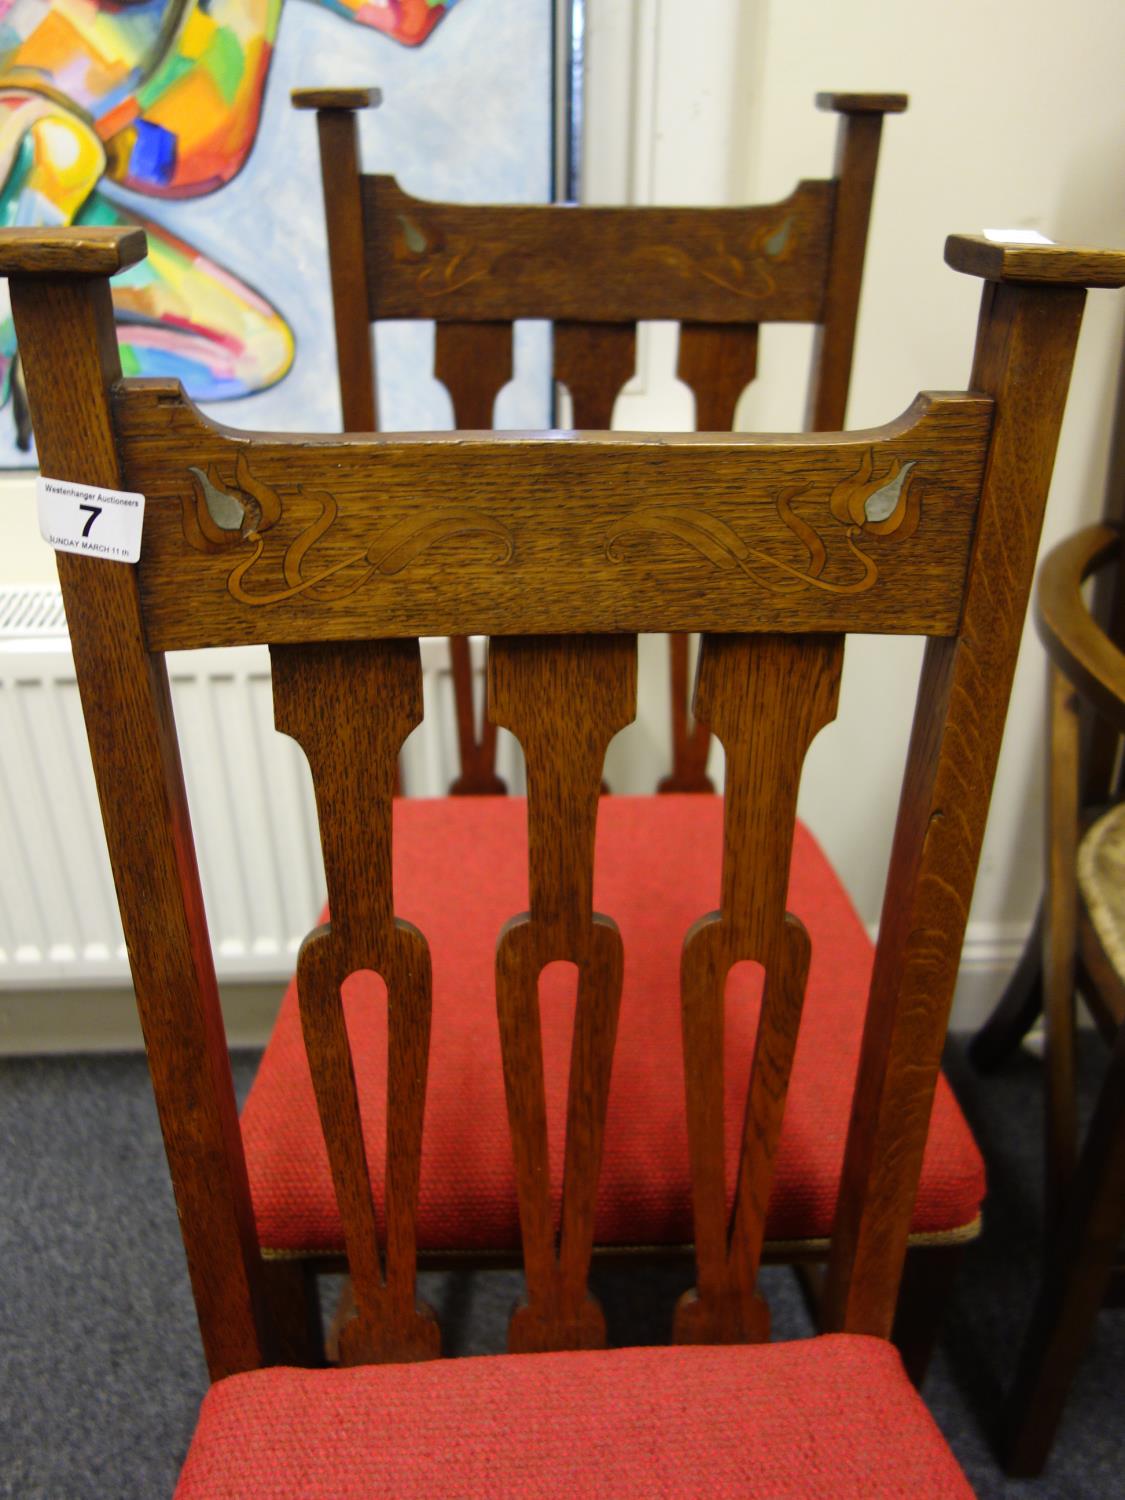 Pair of oak Art Nouveau chairs with inlaid decoration to the back, burgundy upholstered - Image 2 of 3